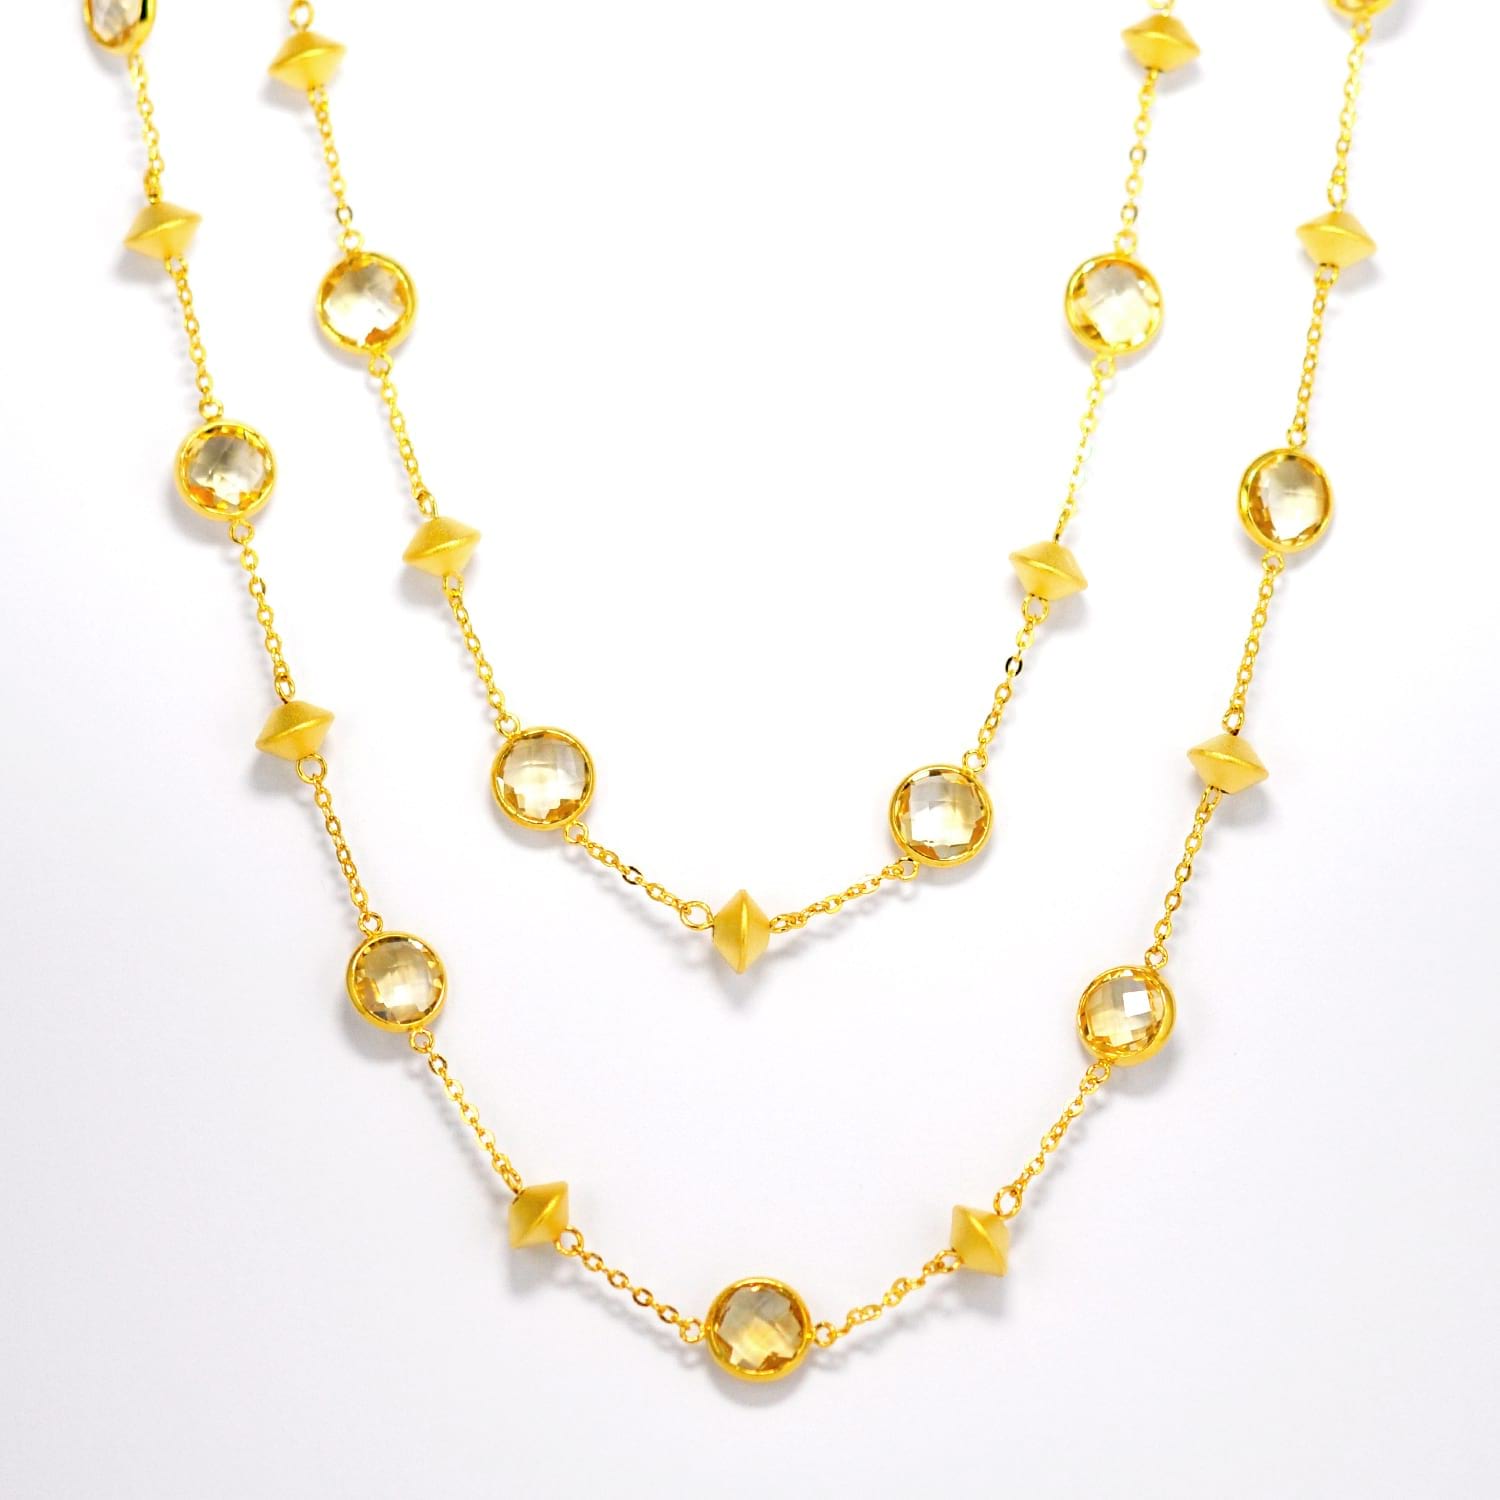 Citrine and golden beads necklace